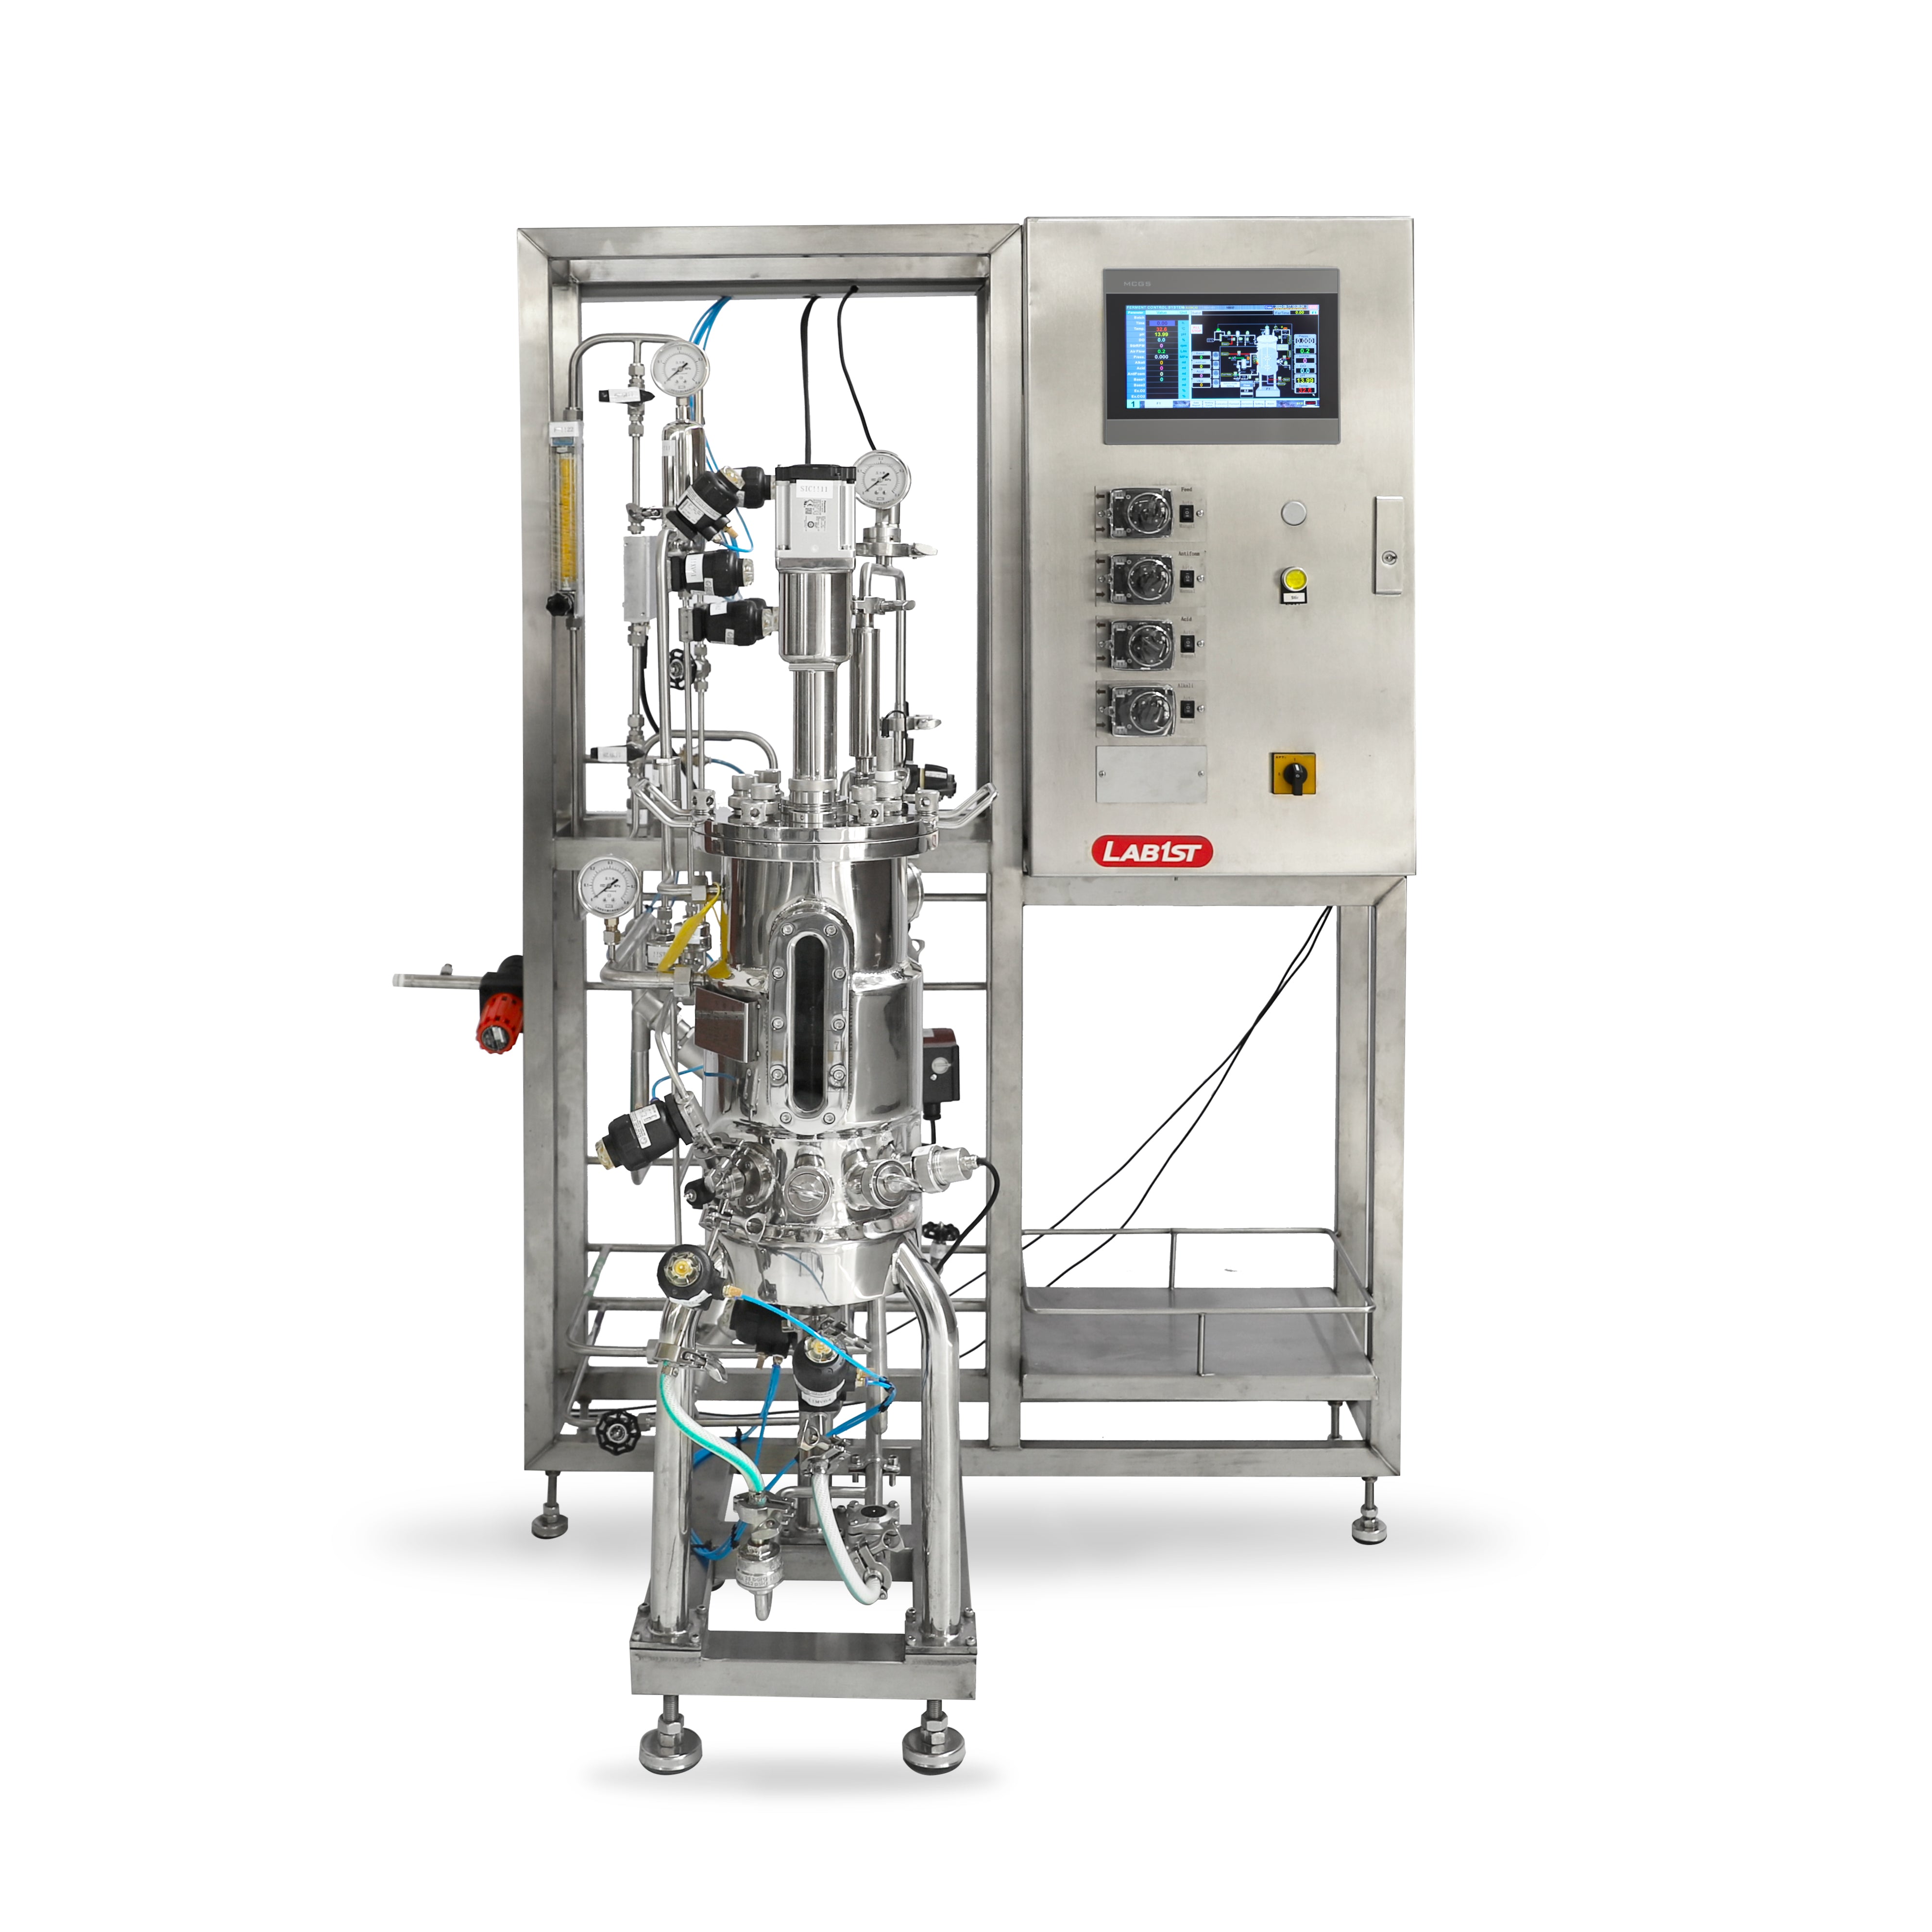 500L Stainless Steel Bioreactor for Microbial Fermentation with 2 Gas Inlets BR500-M1